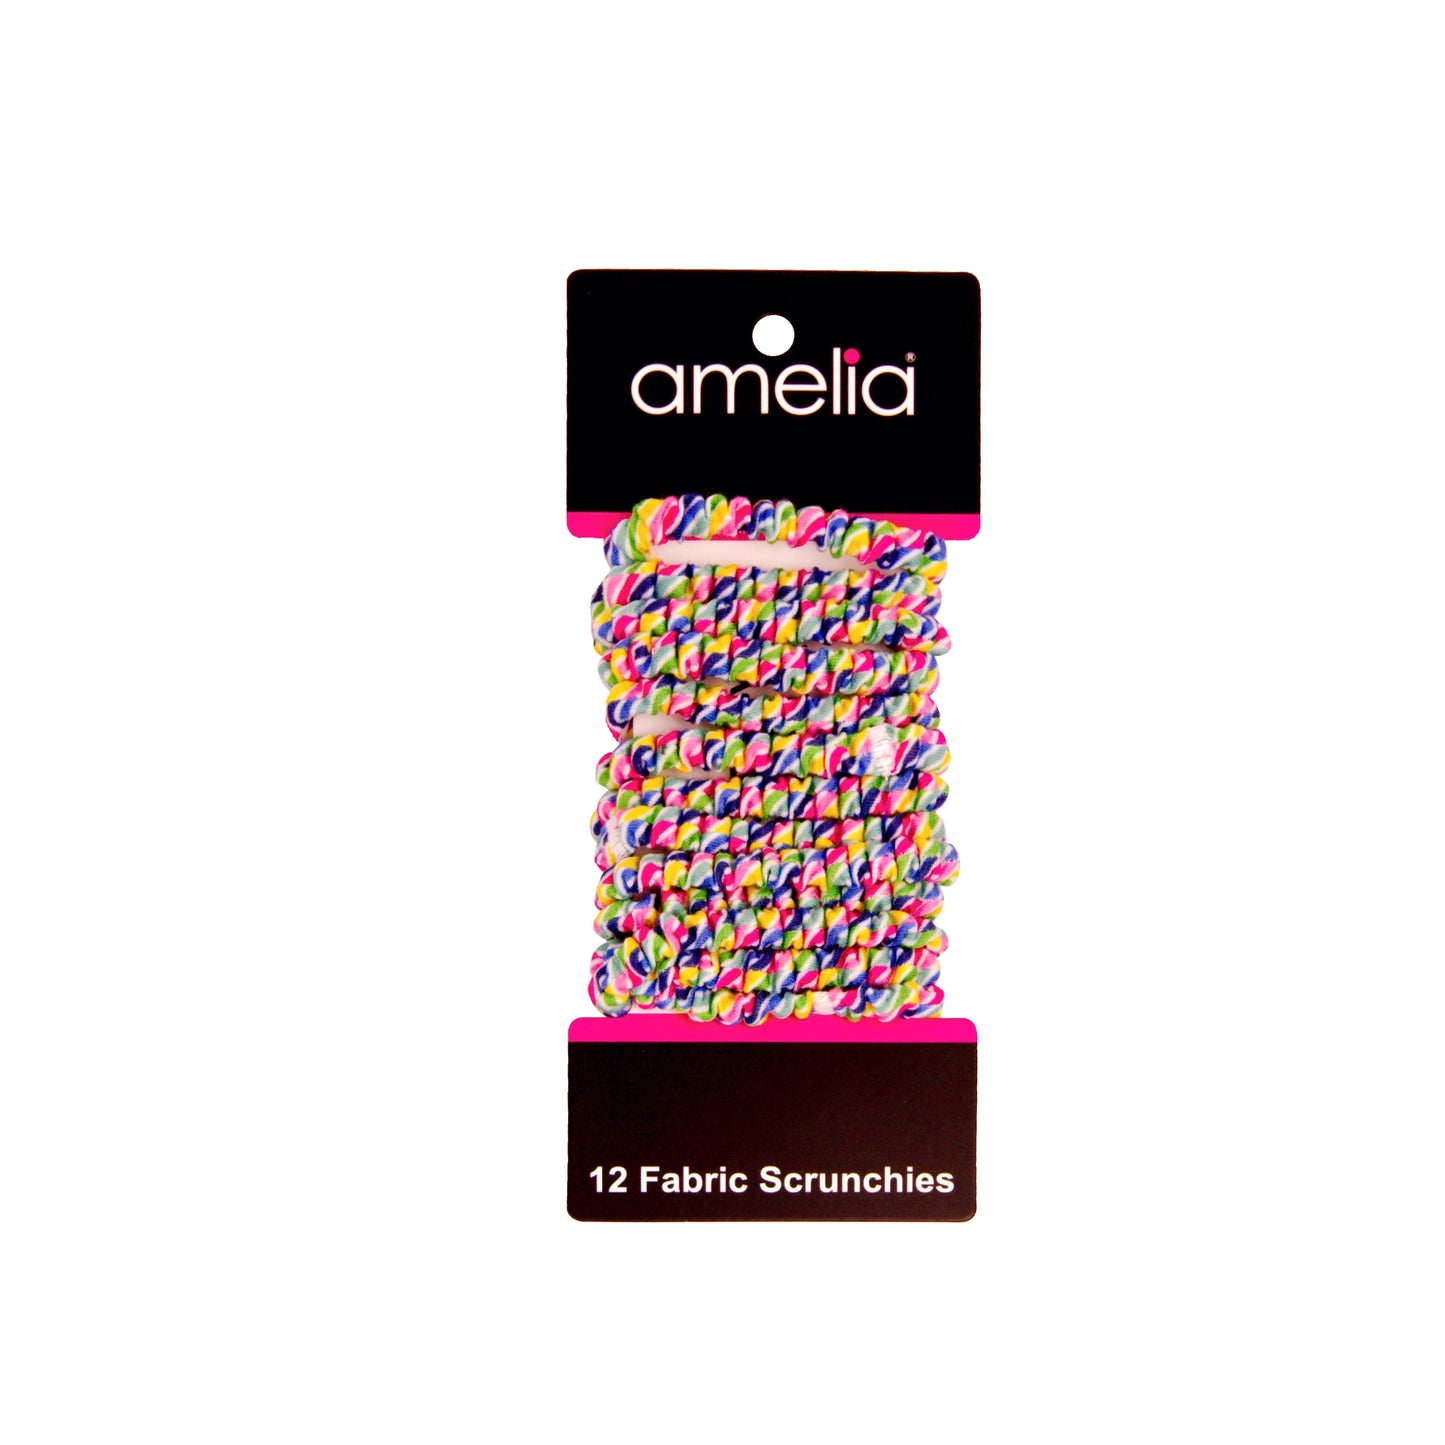 Amelia Beauty, Rainbow Stripe Skinny Jersey Scrunchies, 2.125in Diameter, Gentle on Hair, Strong Hold, No Snag, No Dents or Creases. 12 Pack